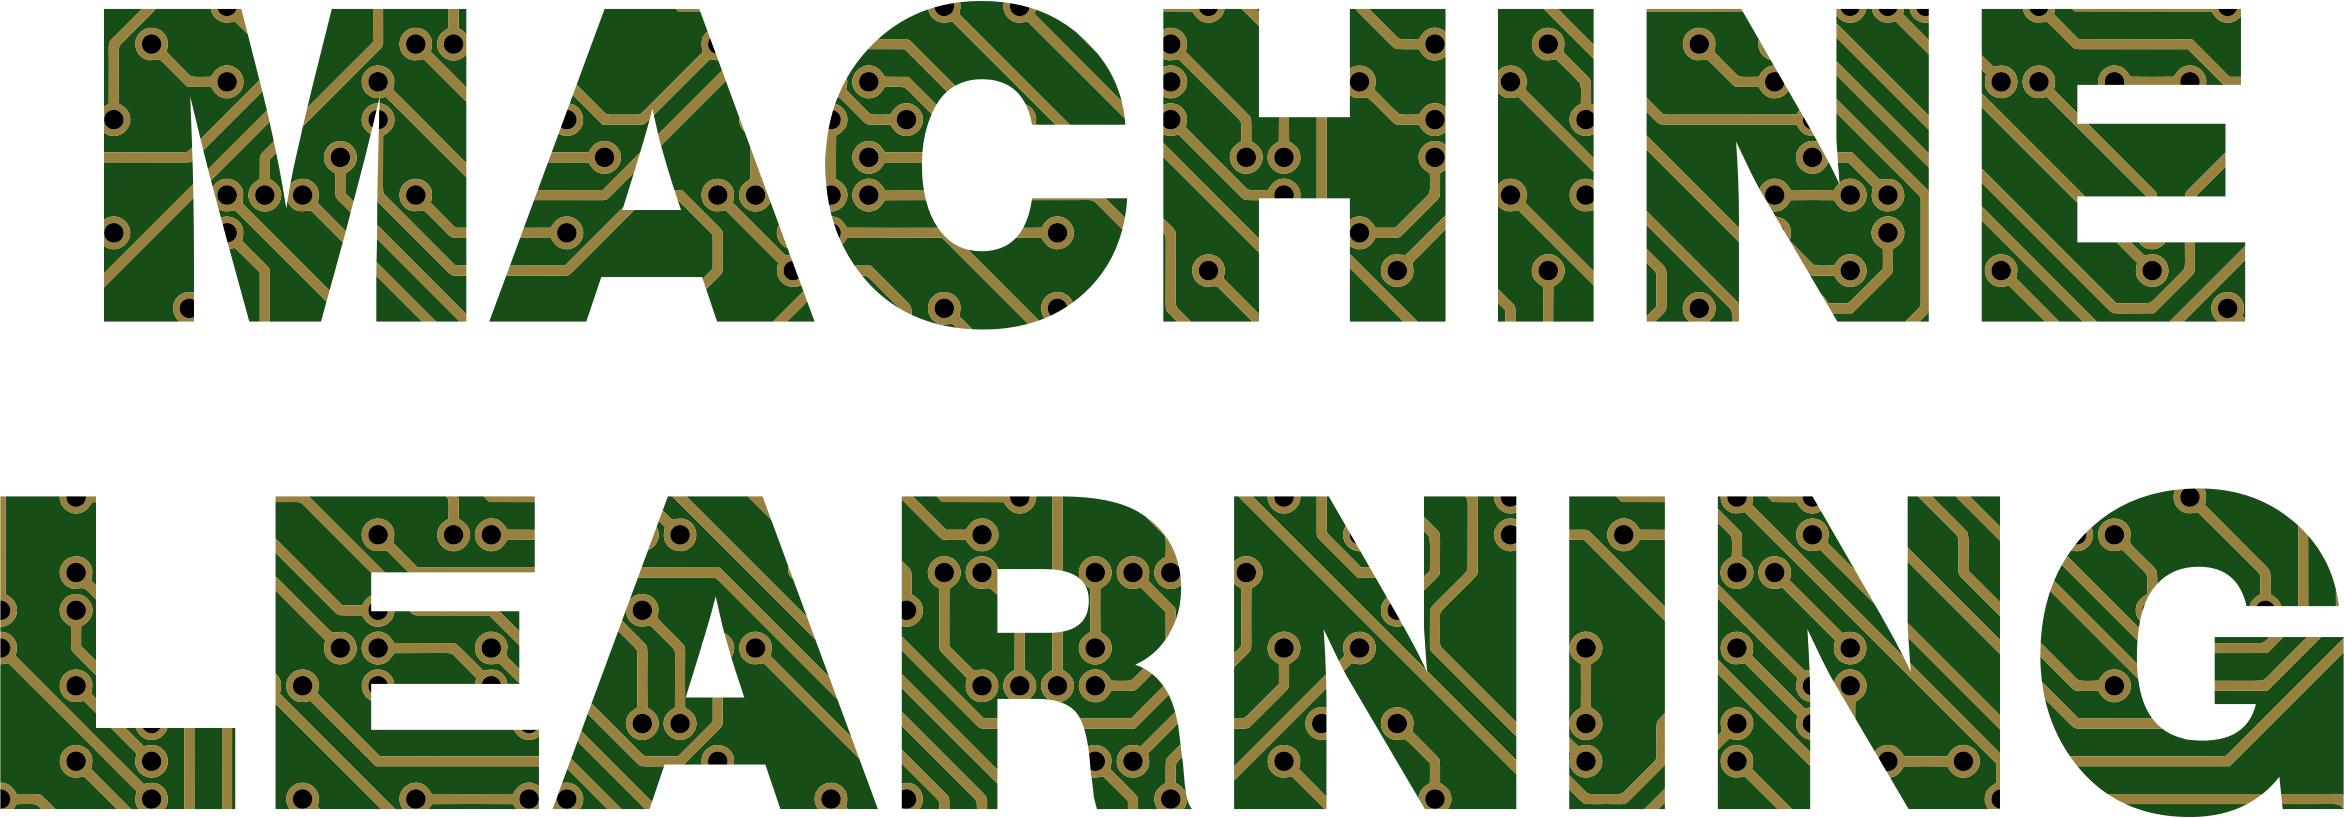 Machine Learning PNG icons